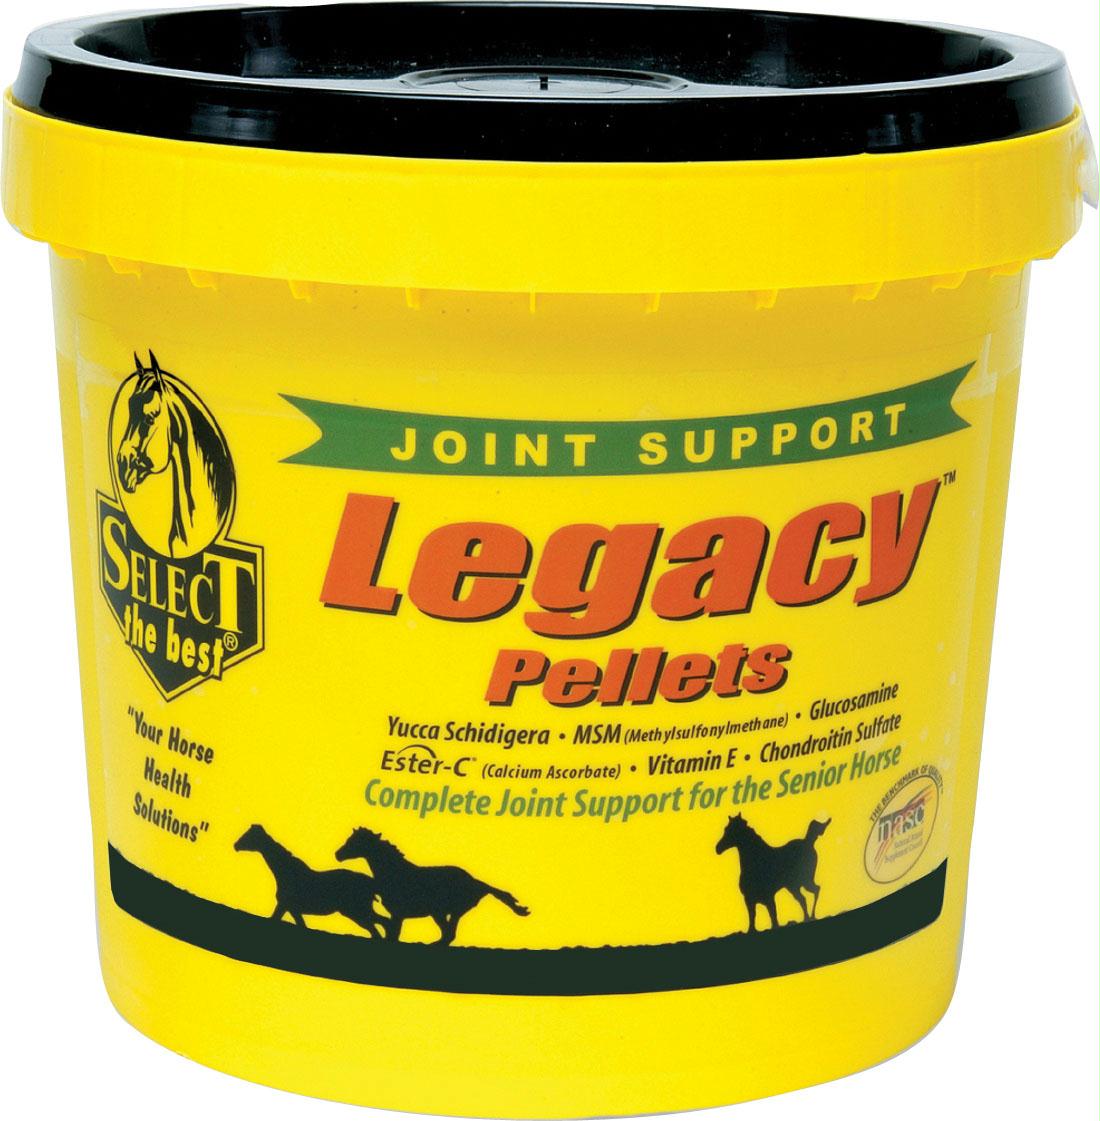 Legacy Pellets Joint Support For Senior Horses - aomega-products